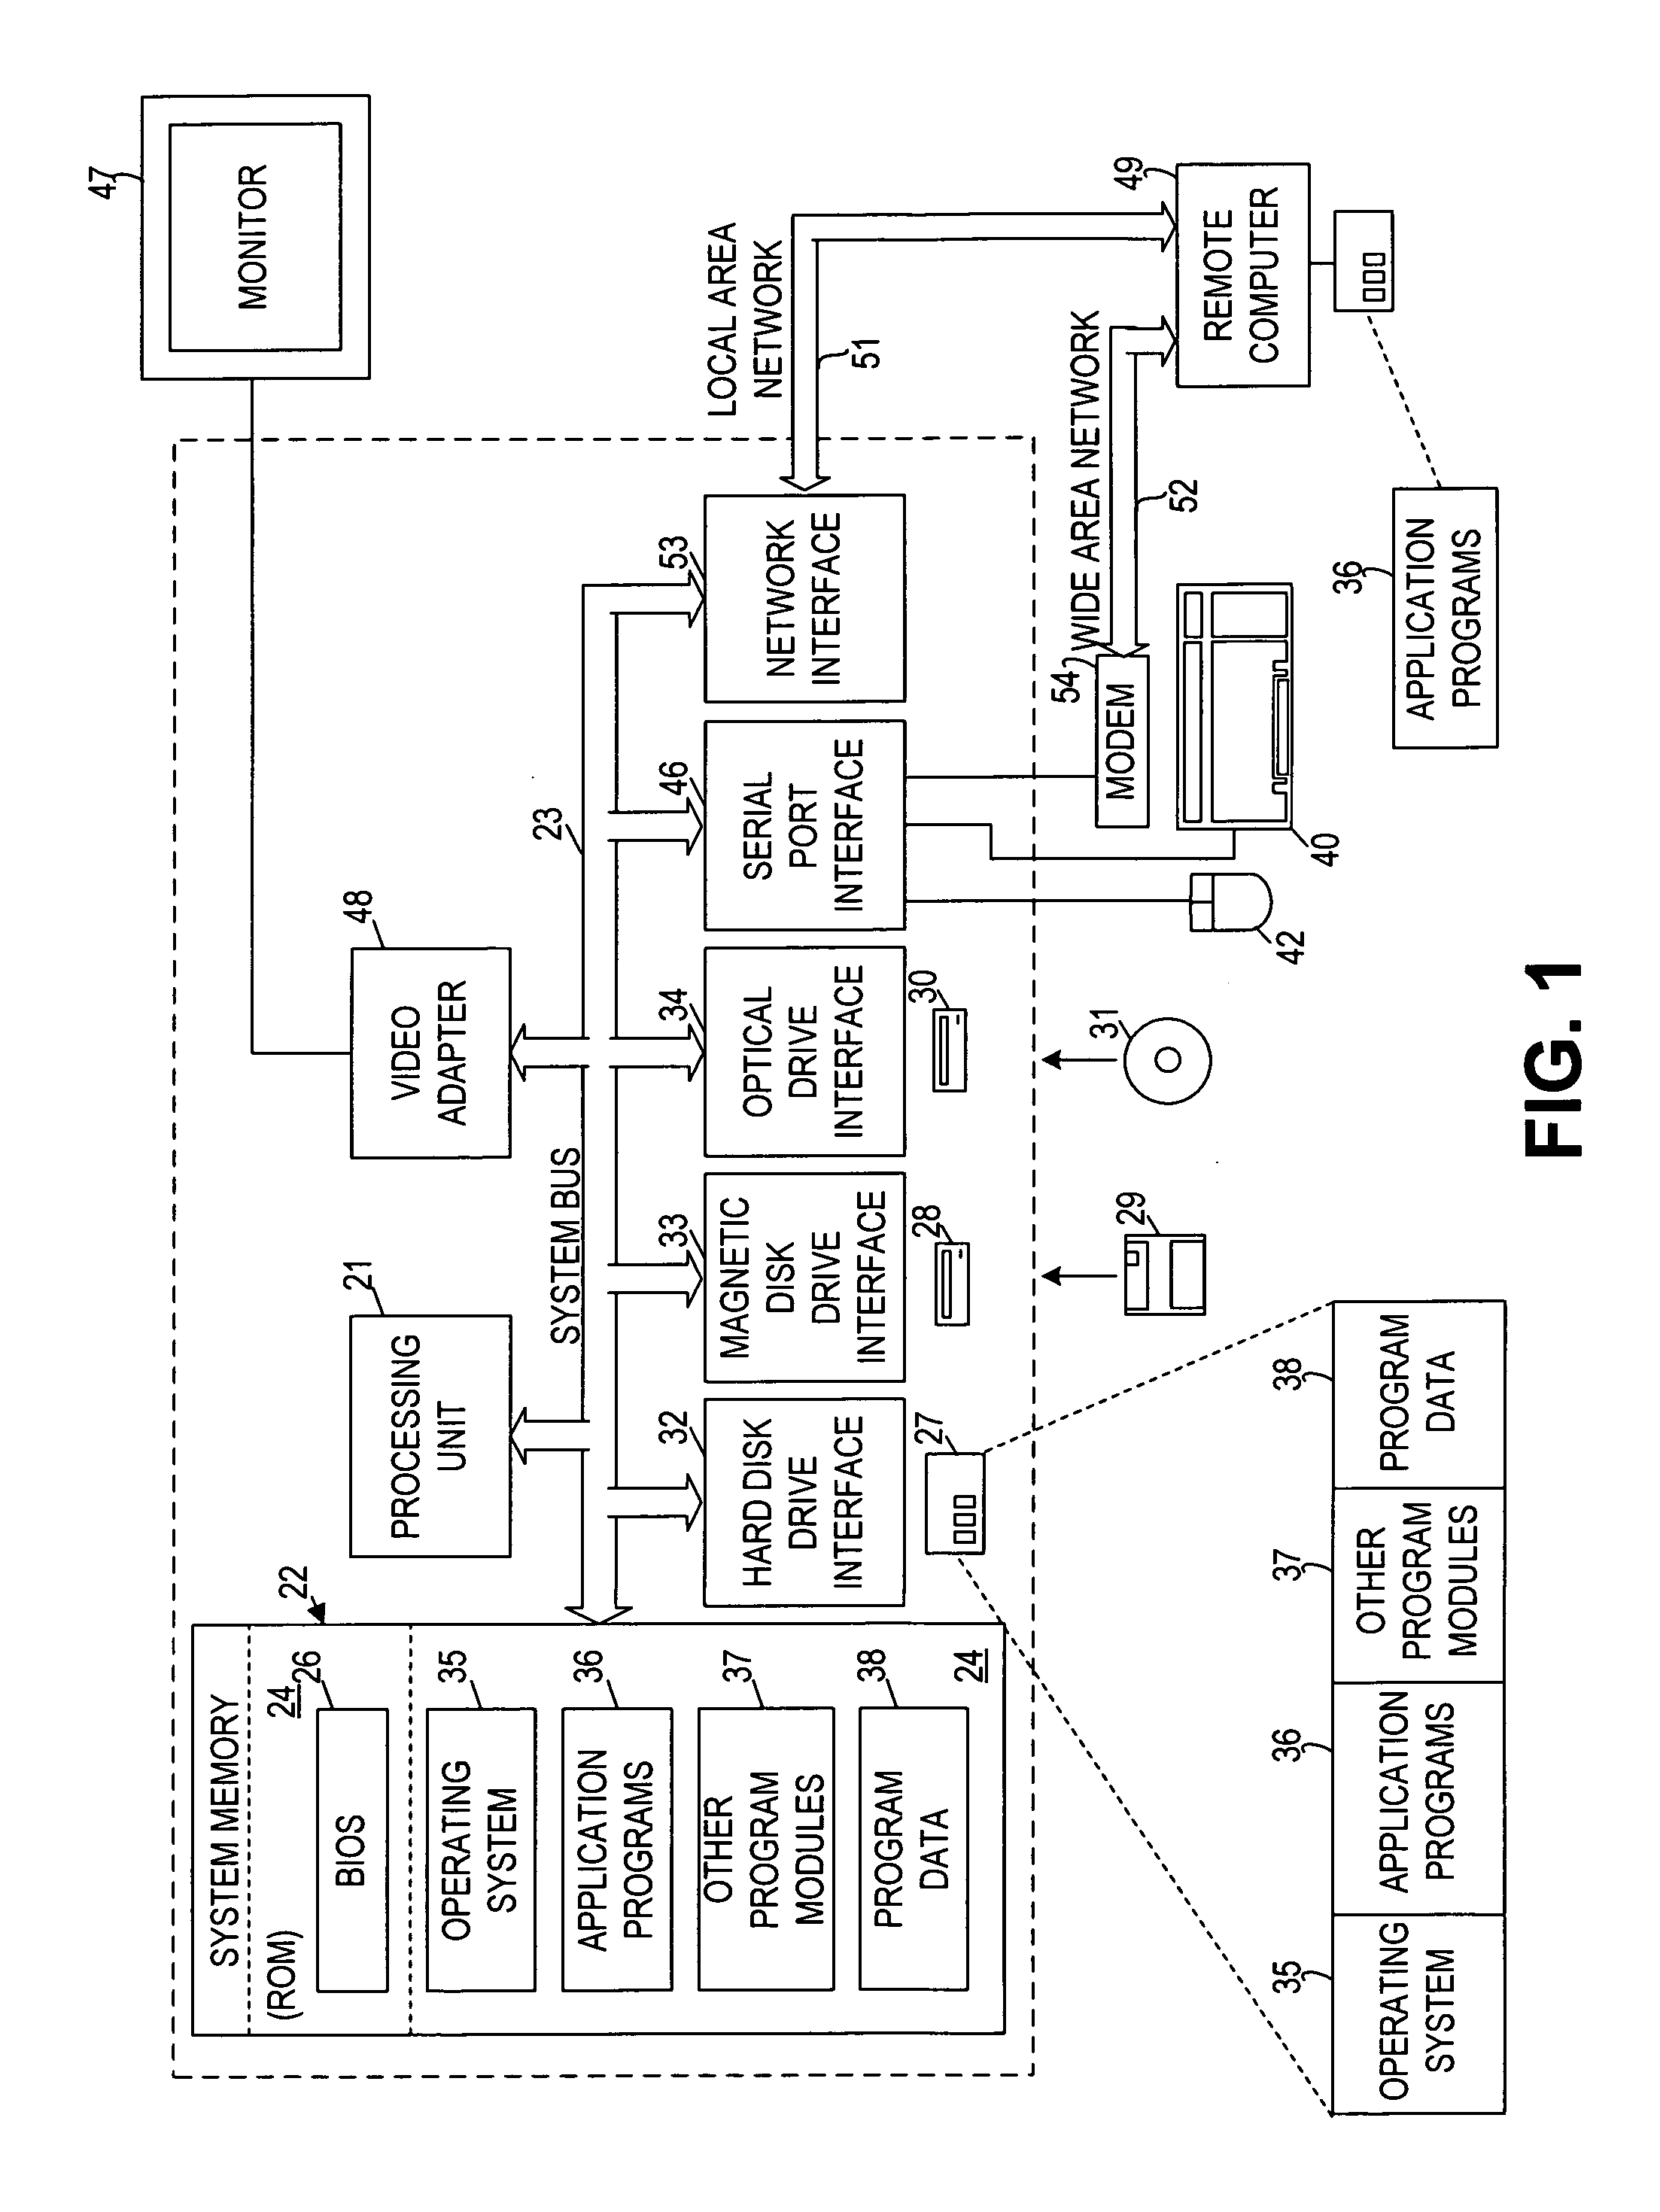 Systems and methods for estimating and integrating measures of human cognitive load into the behavior of computational applications and services